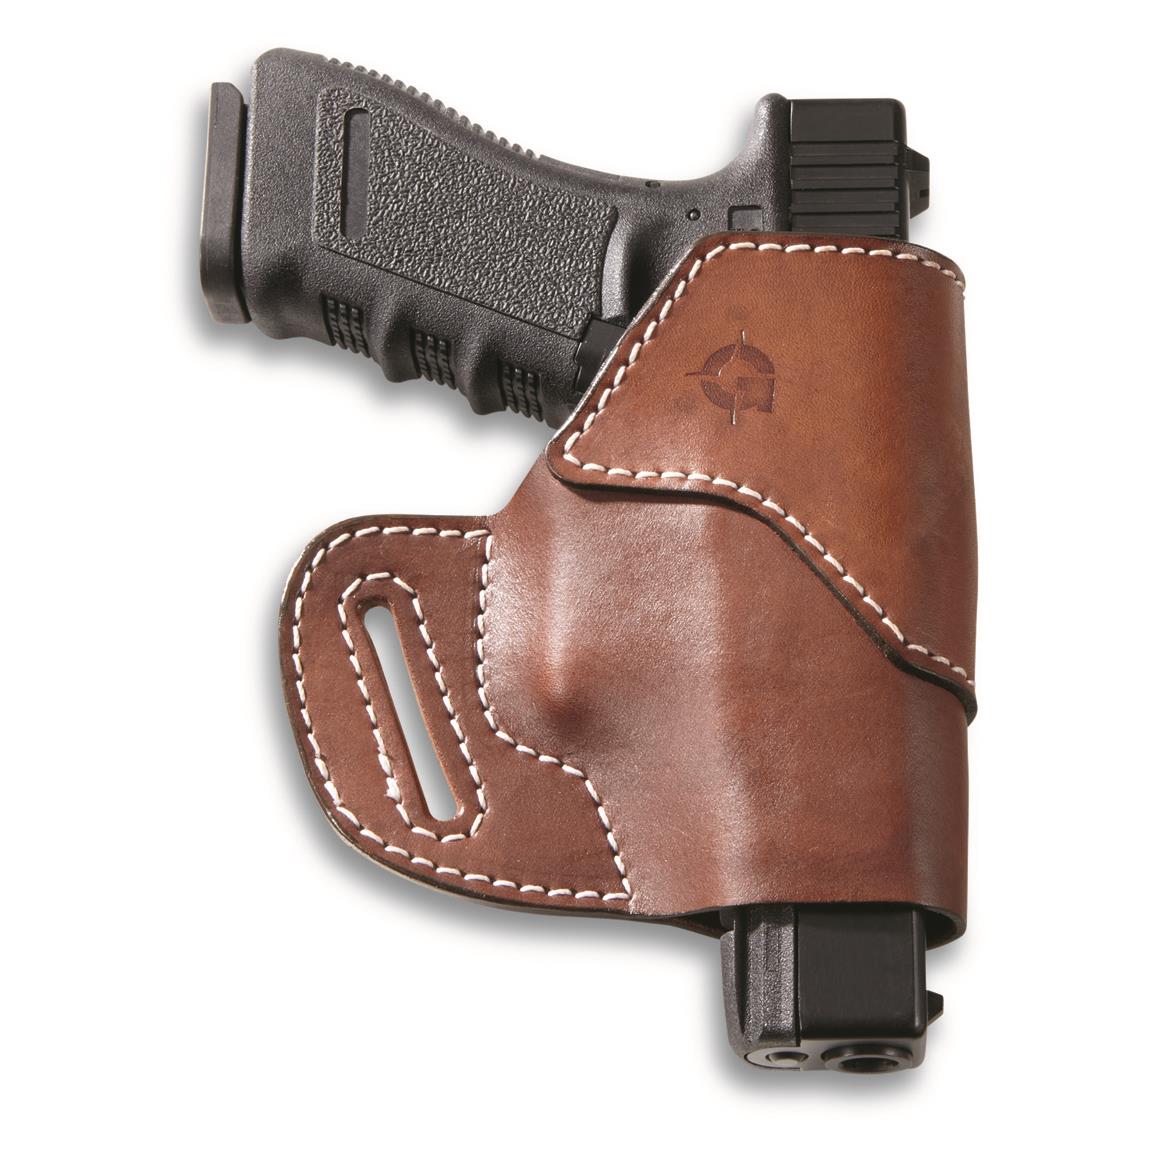 Guide Gear Universal OWB Hip Holster, Universal Fit